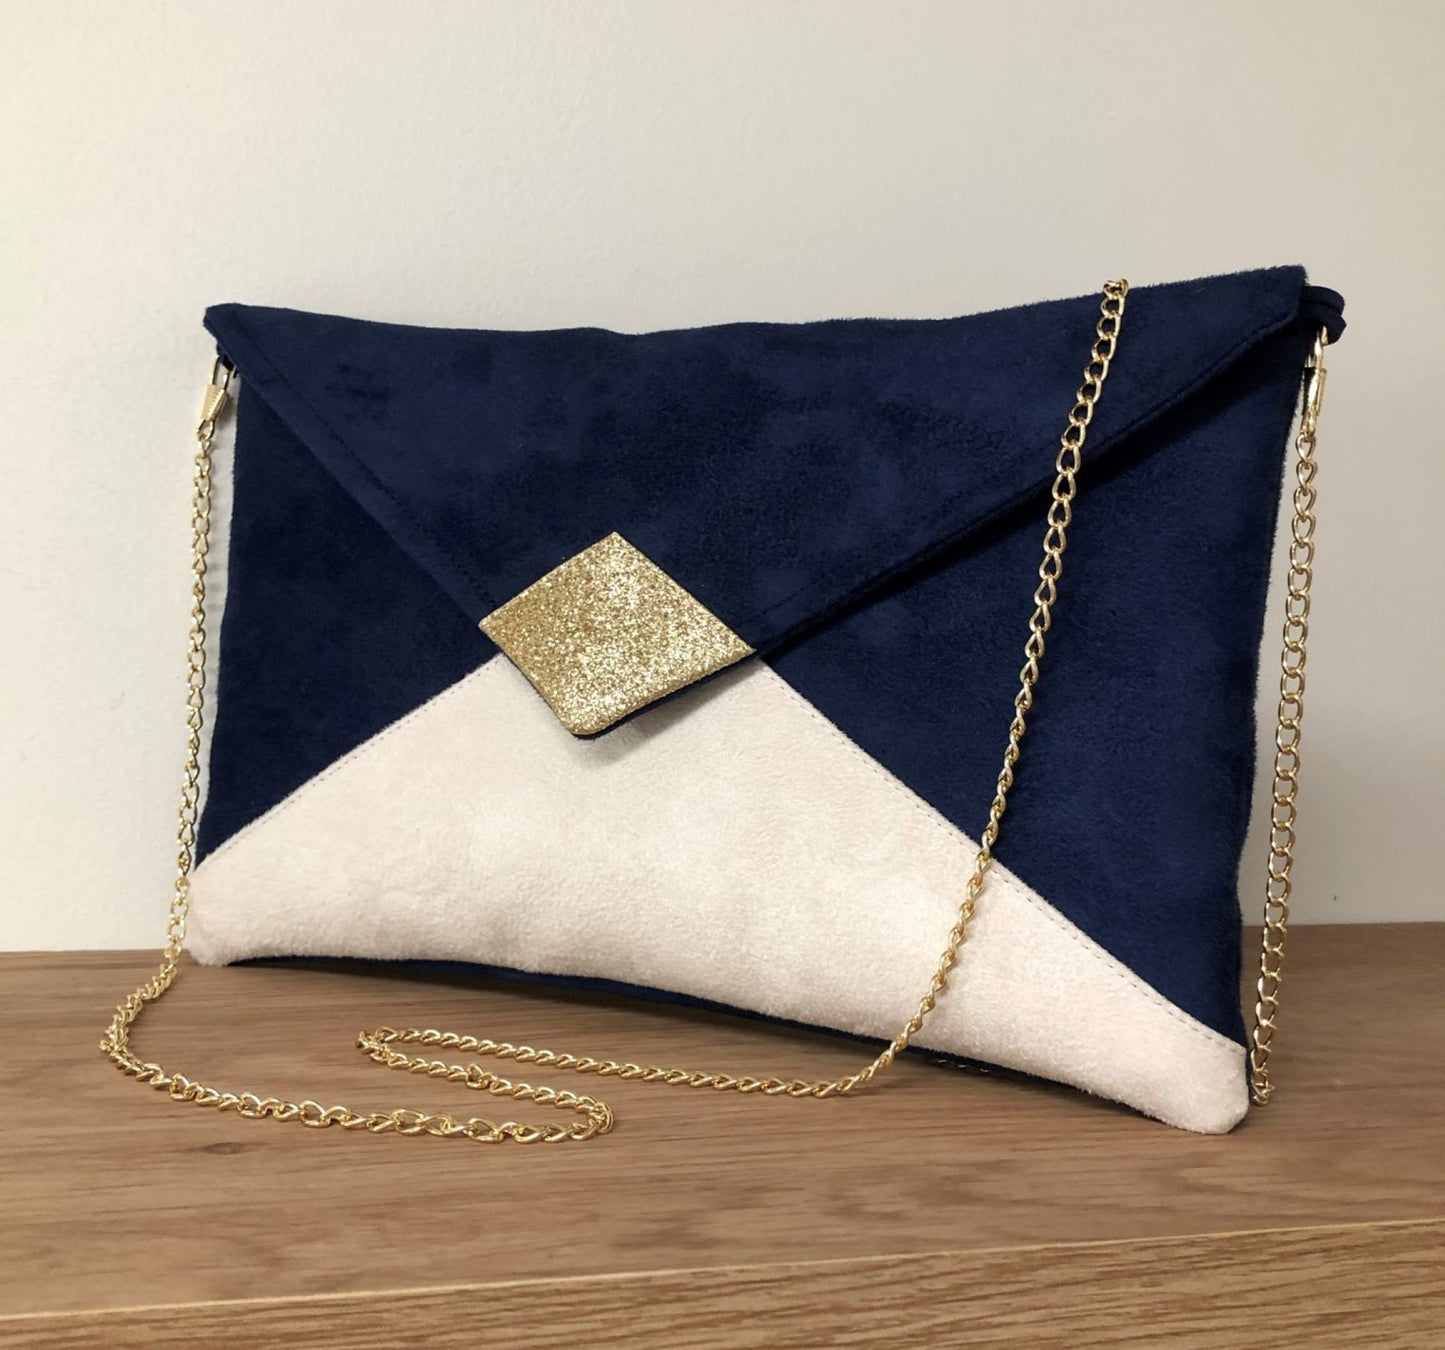 Isa clutch bag in navy blue and ecru with gold sequins